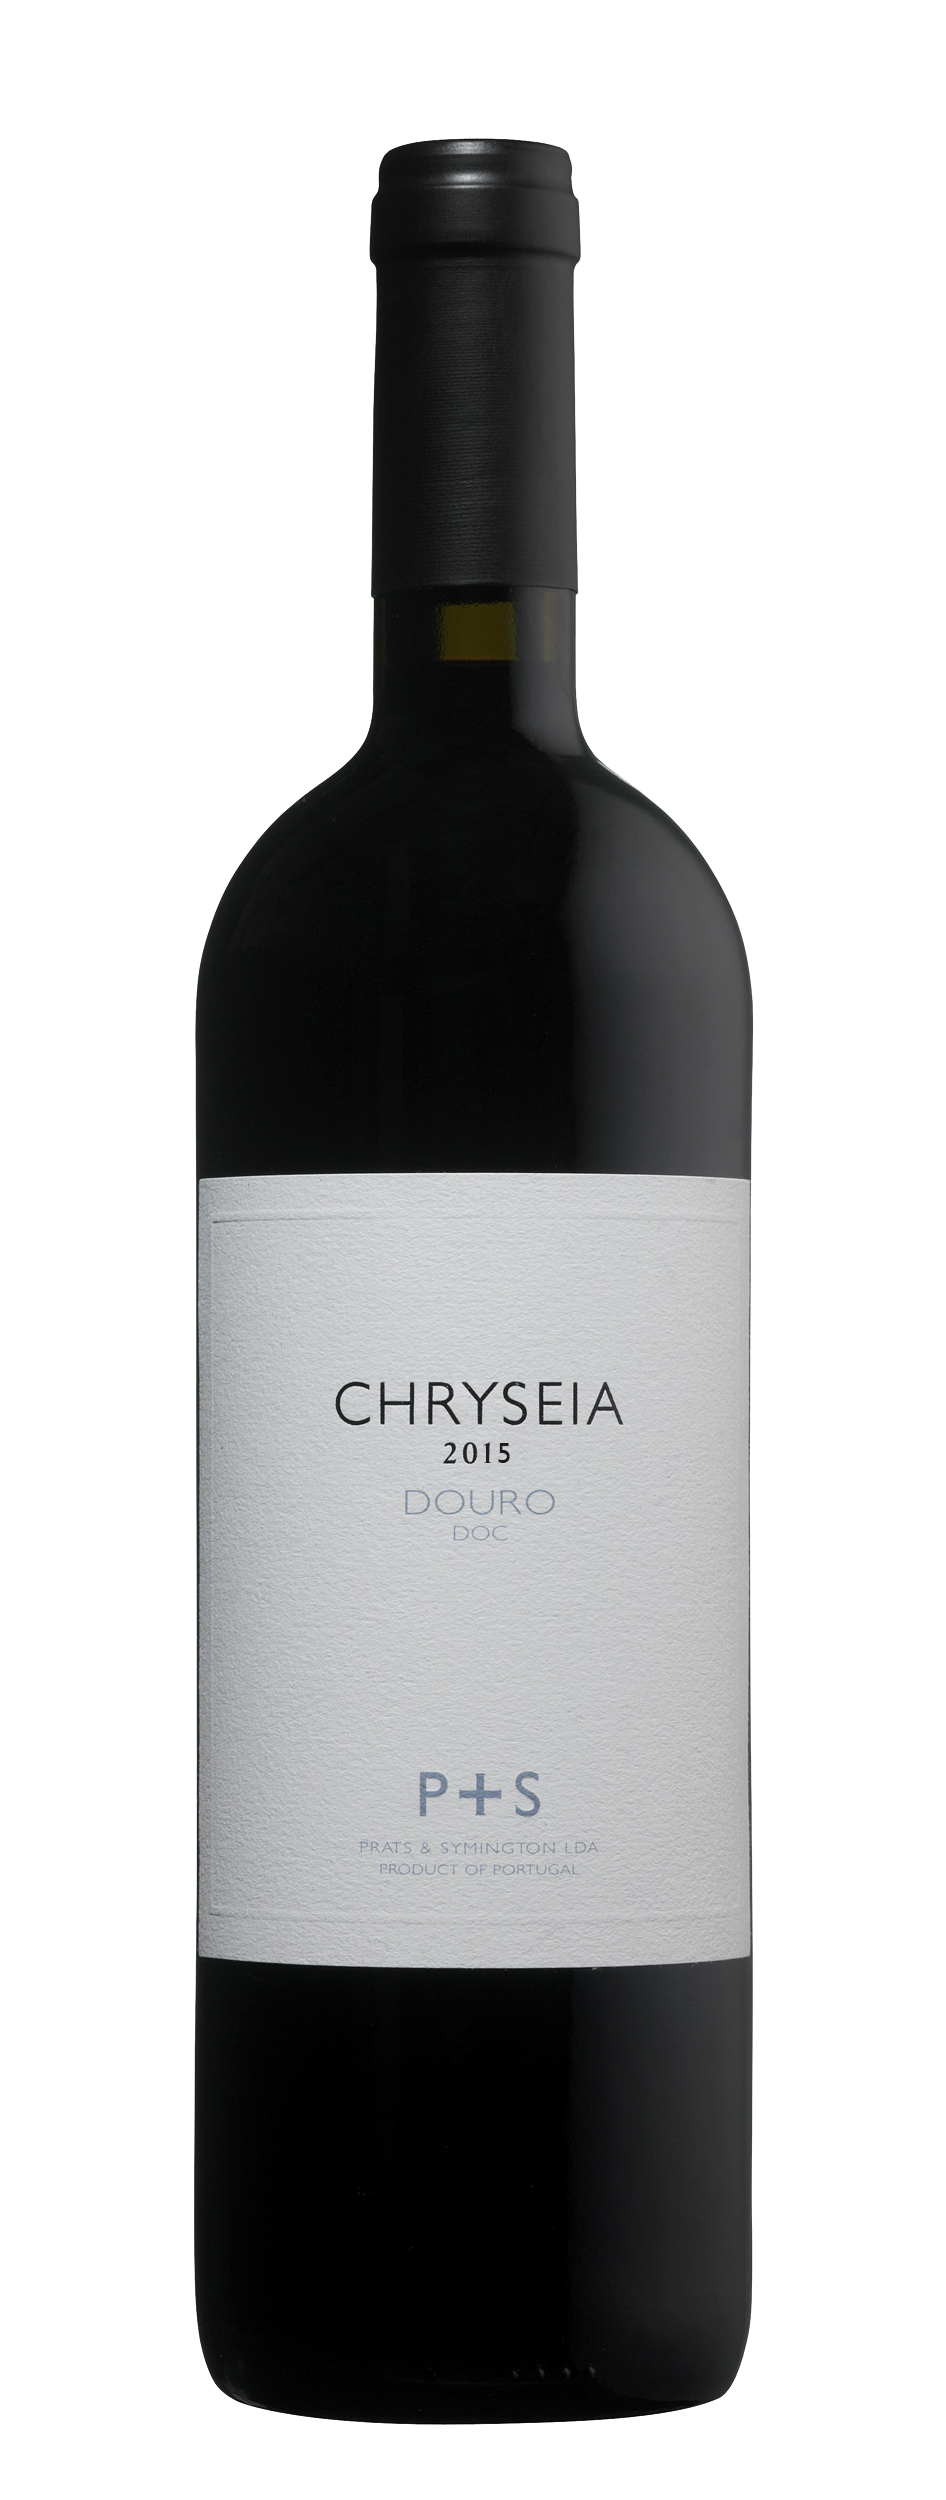 Product Image for P&S CHRYSEIA DOURO RED 2015 - DOUBLE MAGNUM